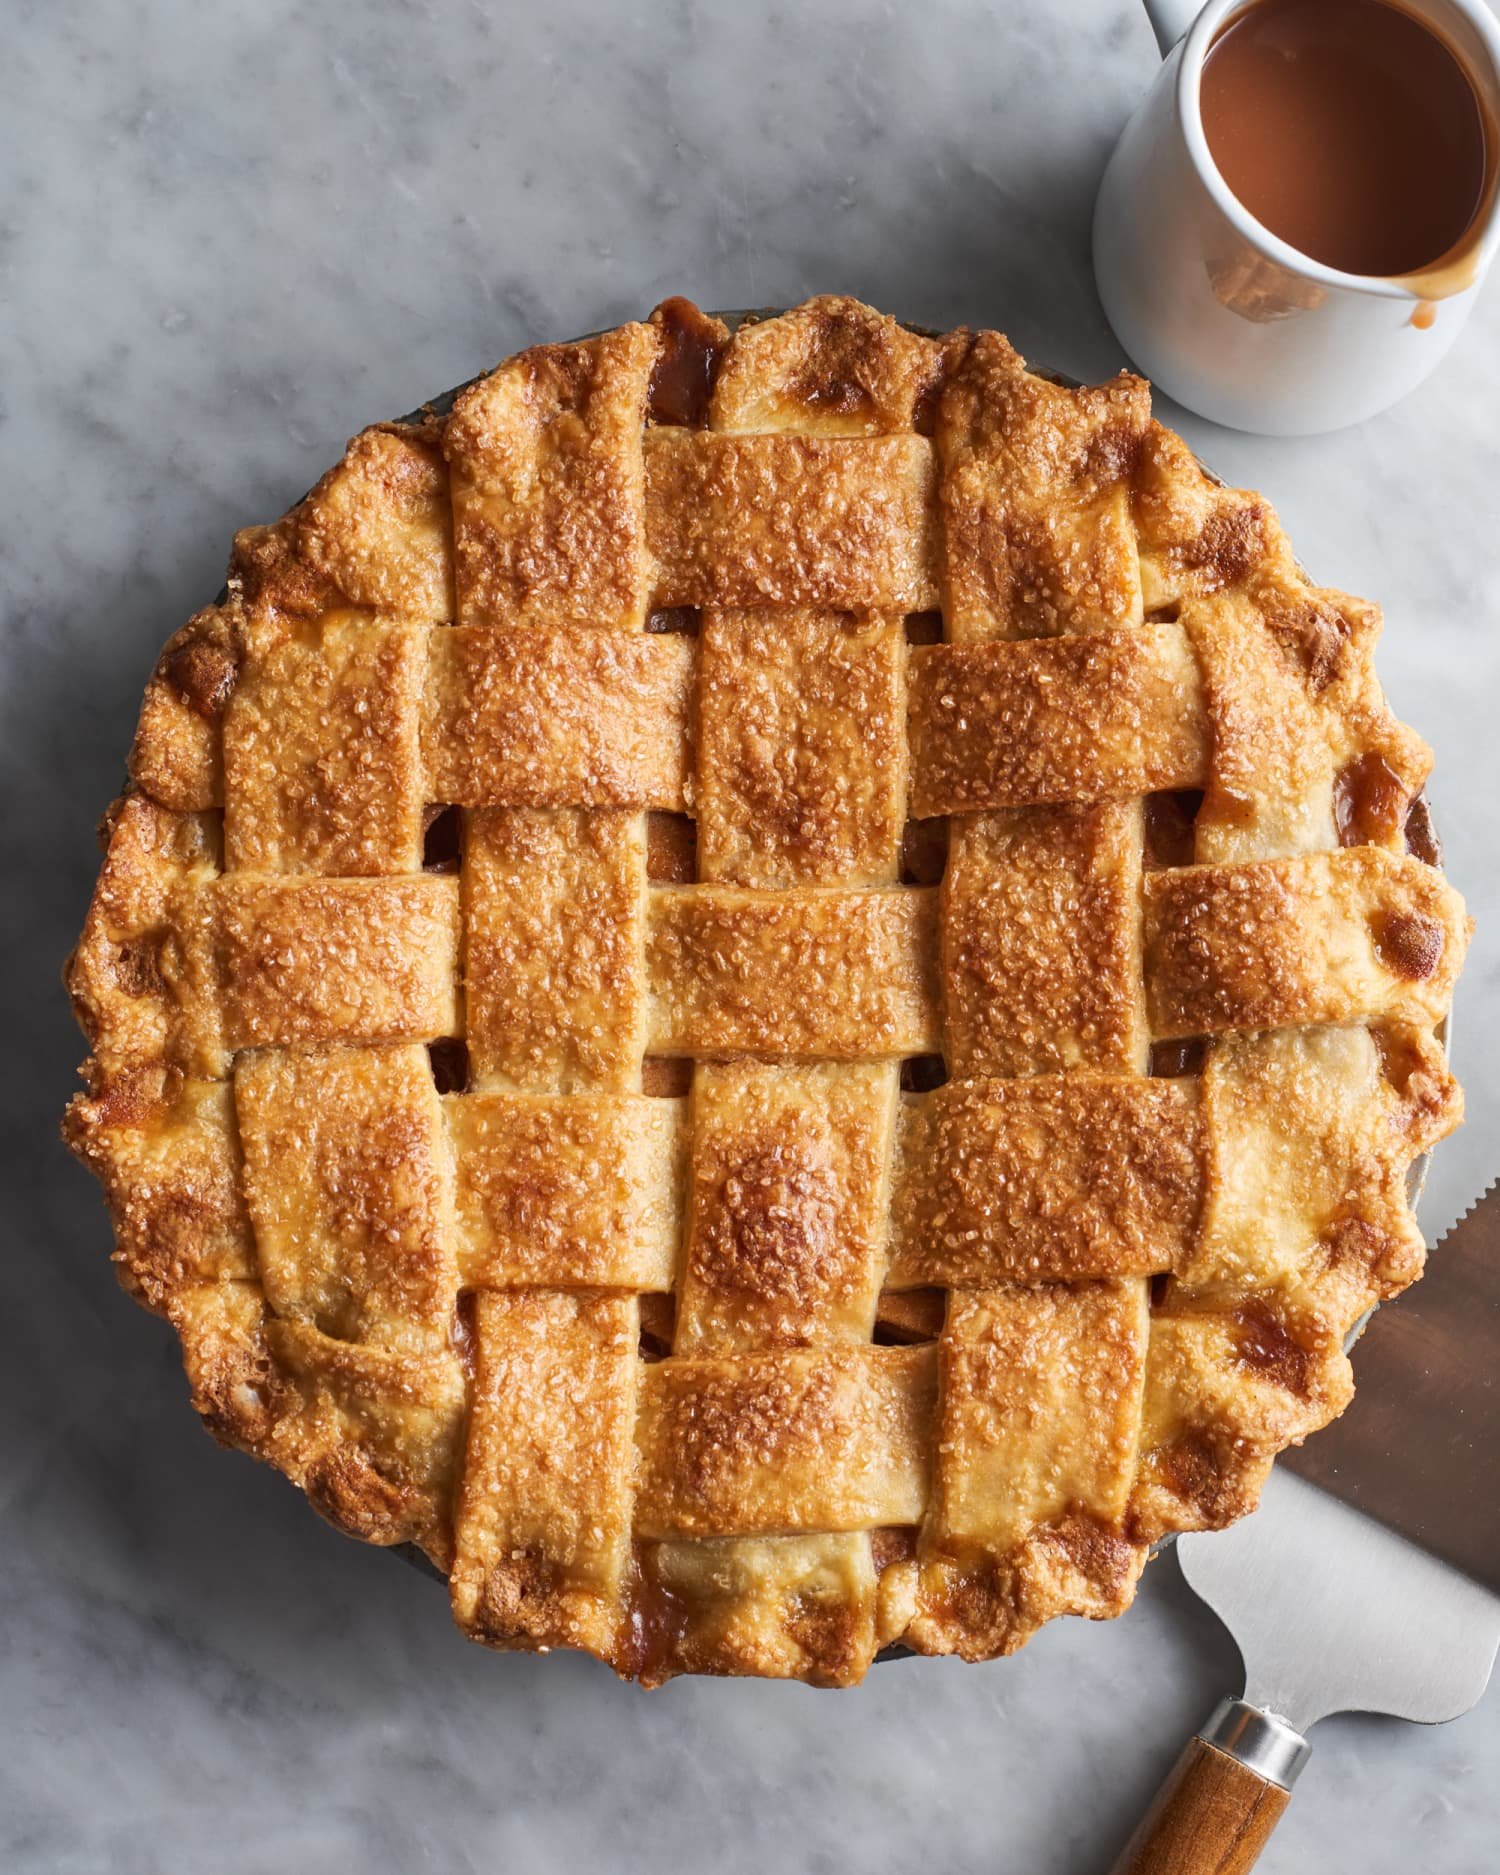 3 Super-Helpful Pie Tools Our Grandmas Absolutely Swore By